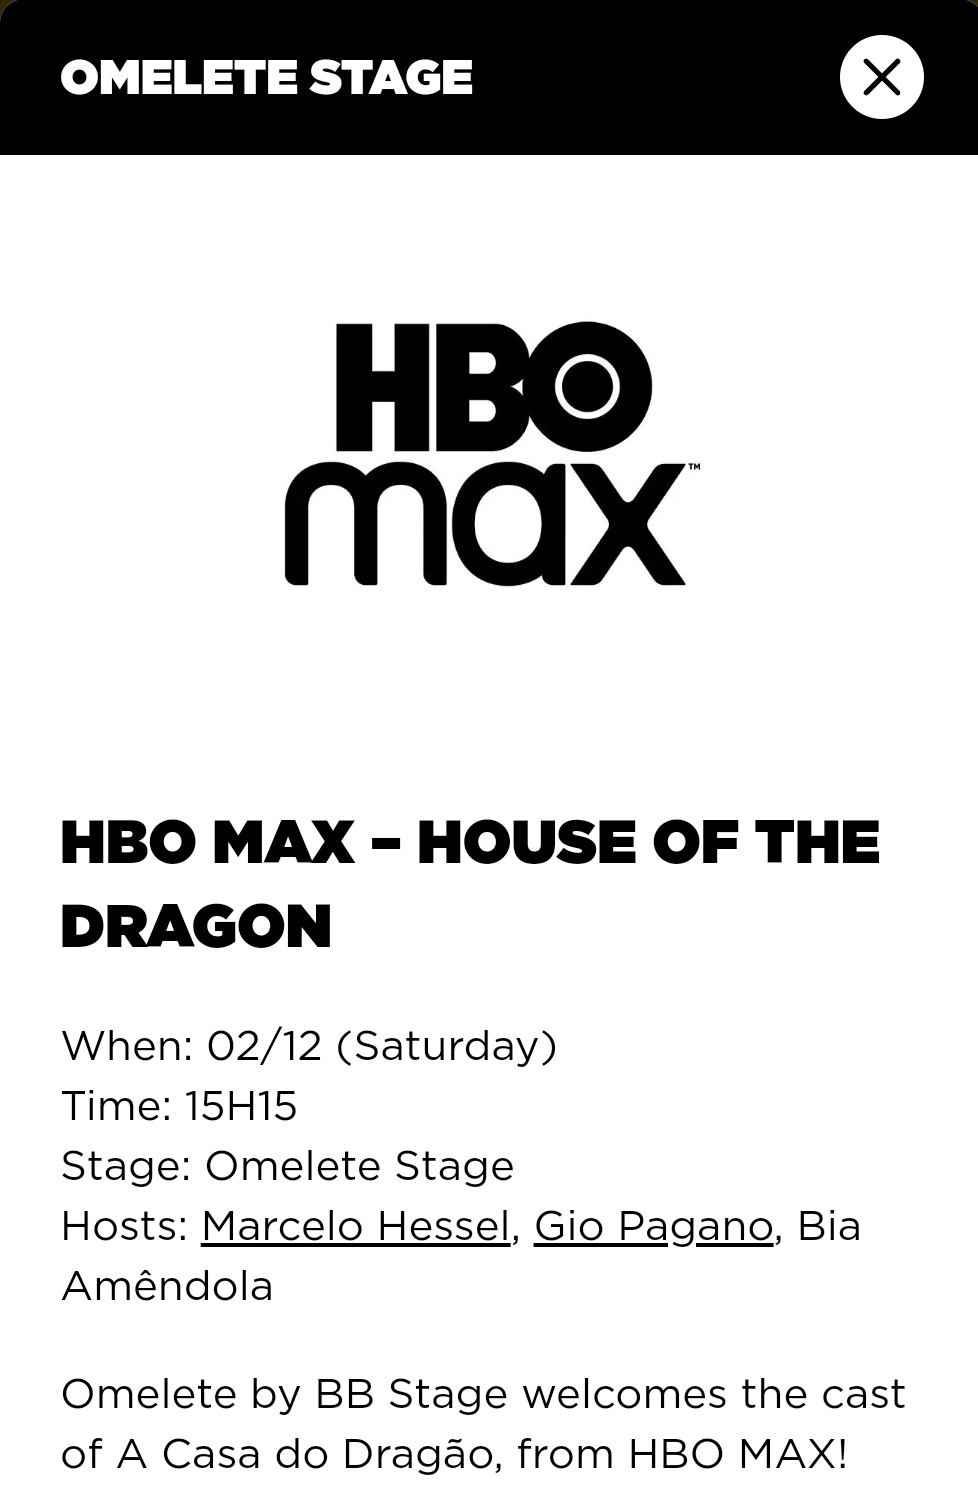 Ewan and Steve will be on the HBO Max panel on the Thunder Stage